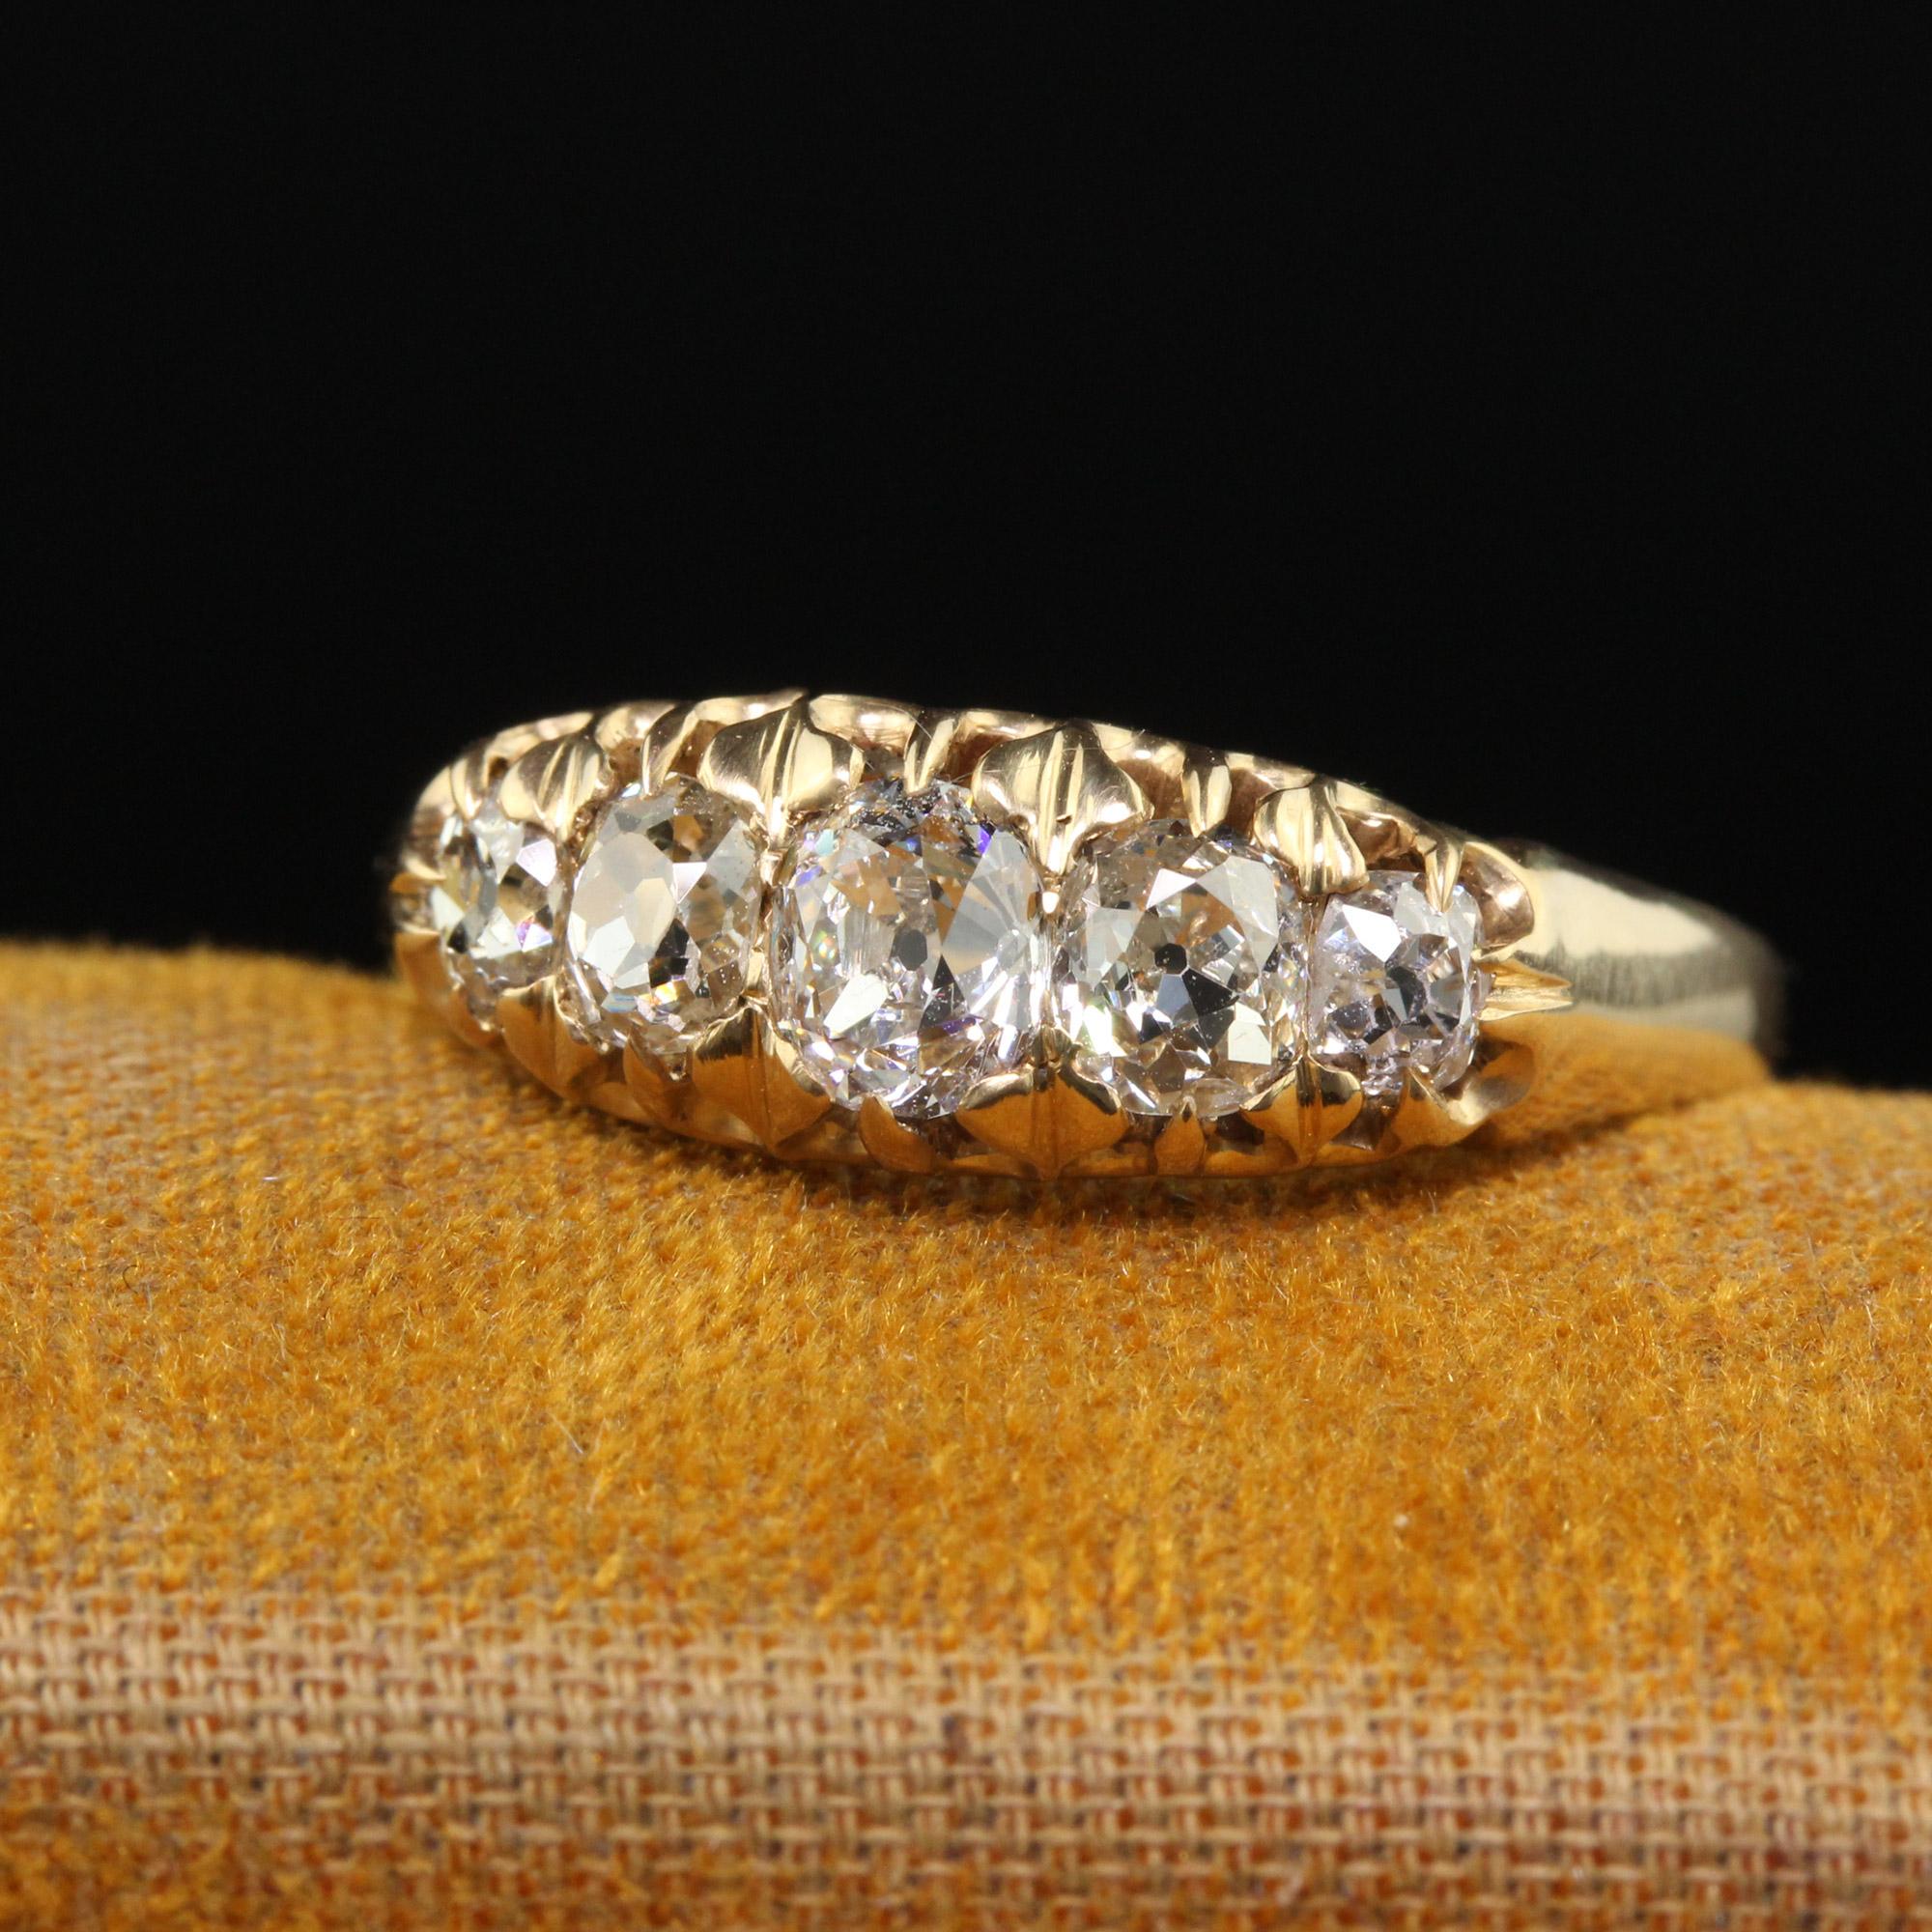 Beautiful Antique Victorian English 18K Yellow Gold Old Mine Cut Diamond Five Stone Band - GIA. This gorgeous five stone band has chunky old mine cut diamonds set on the top of it. The center was sent to get a GIA report. The ring is in good